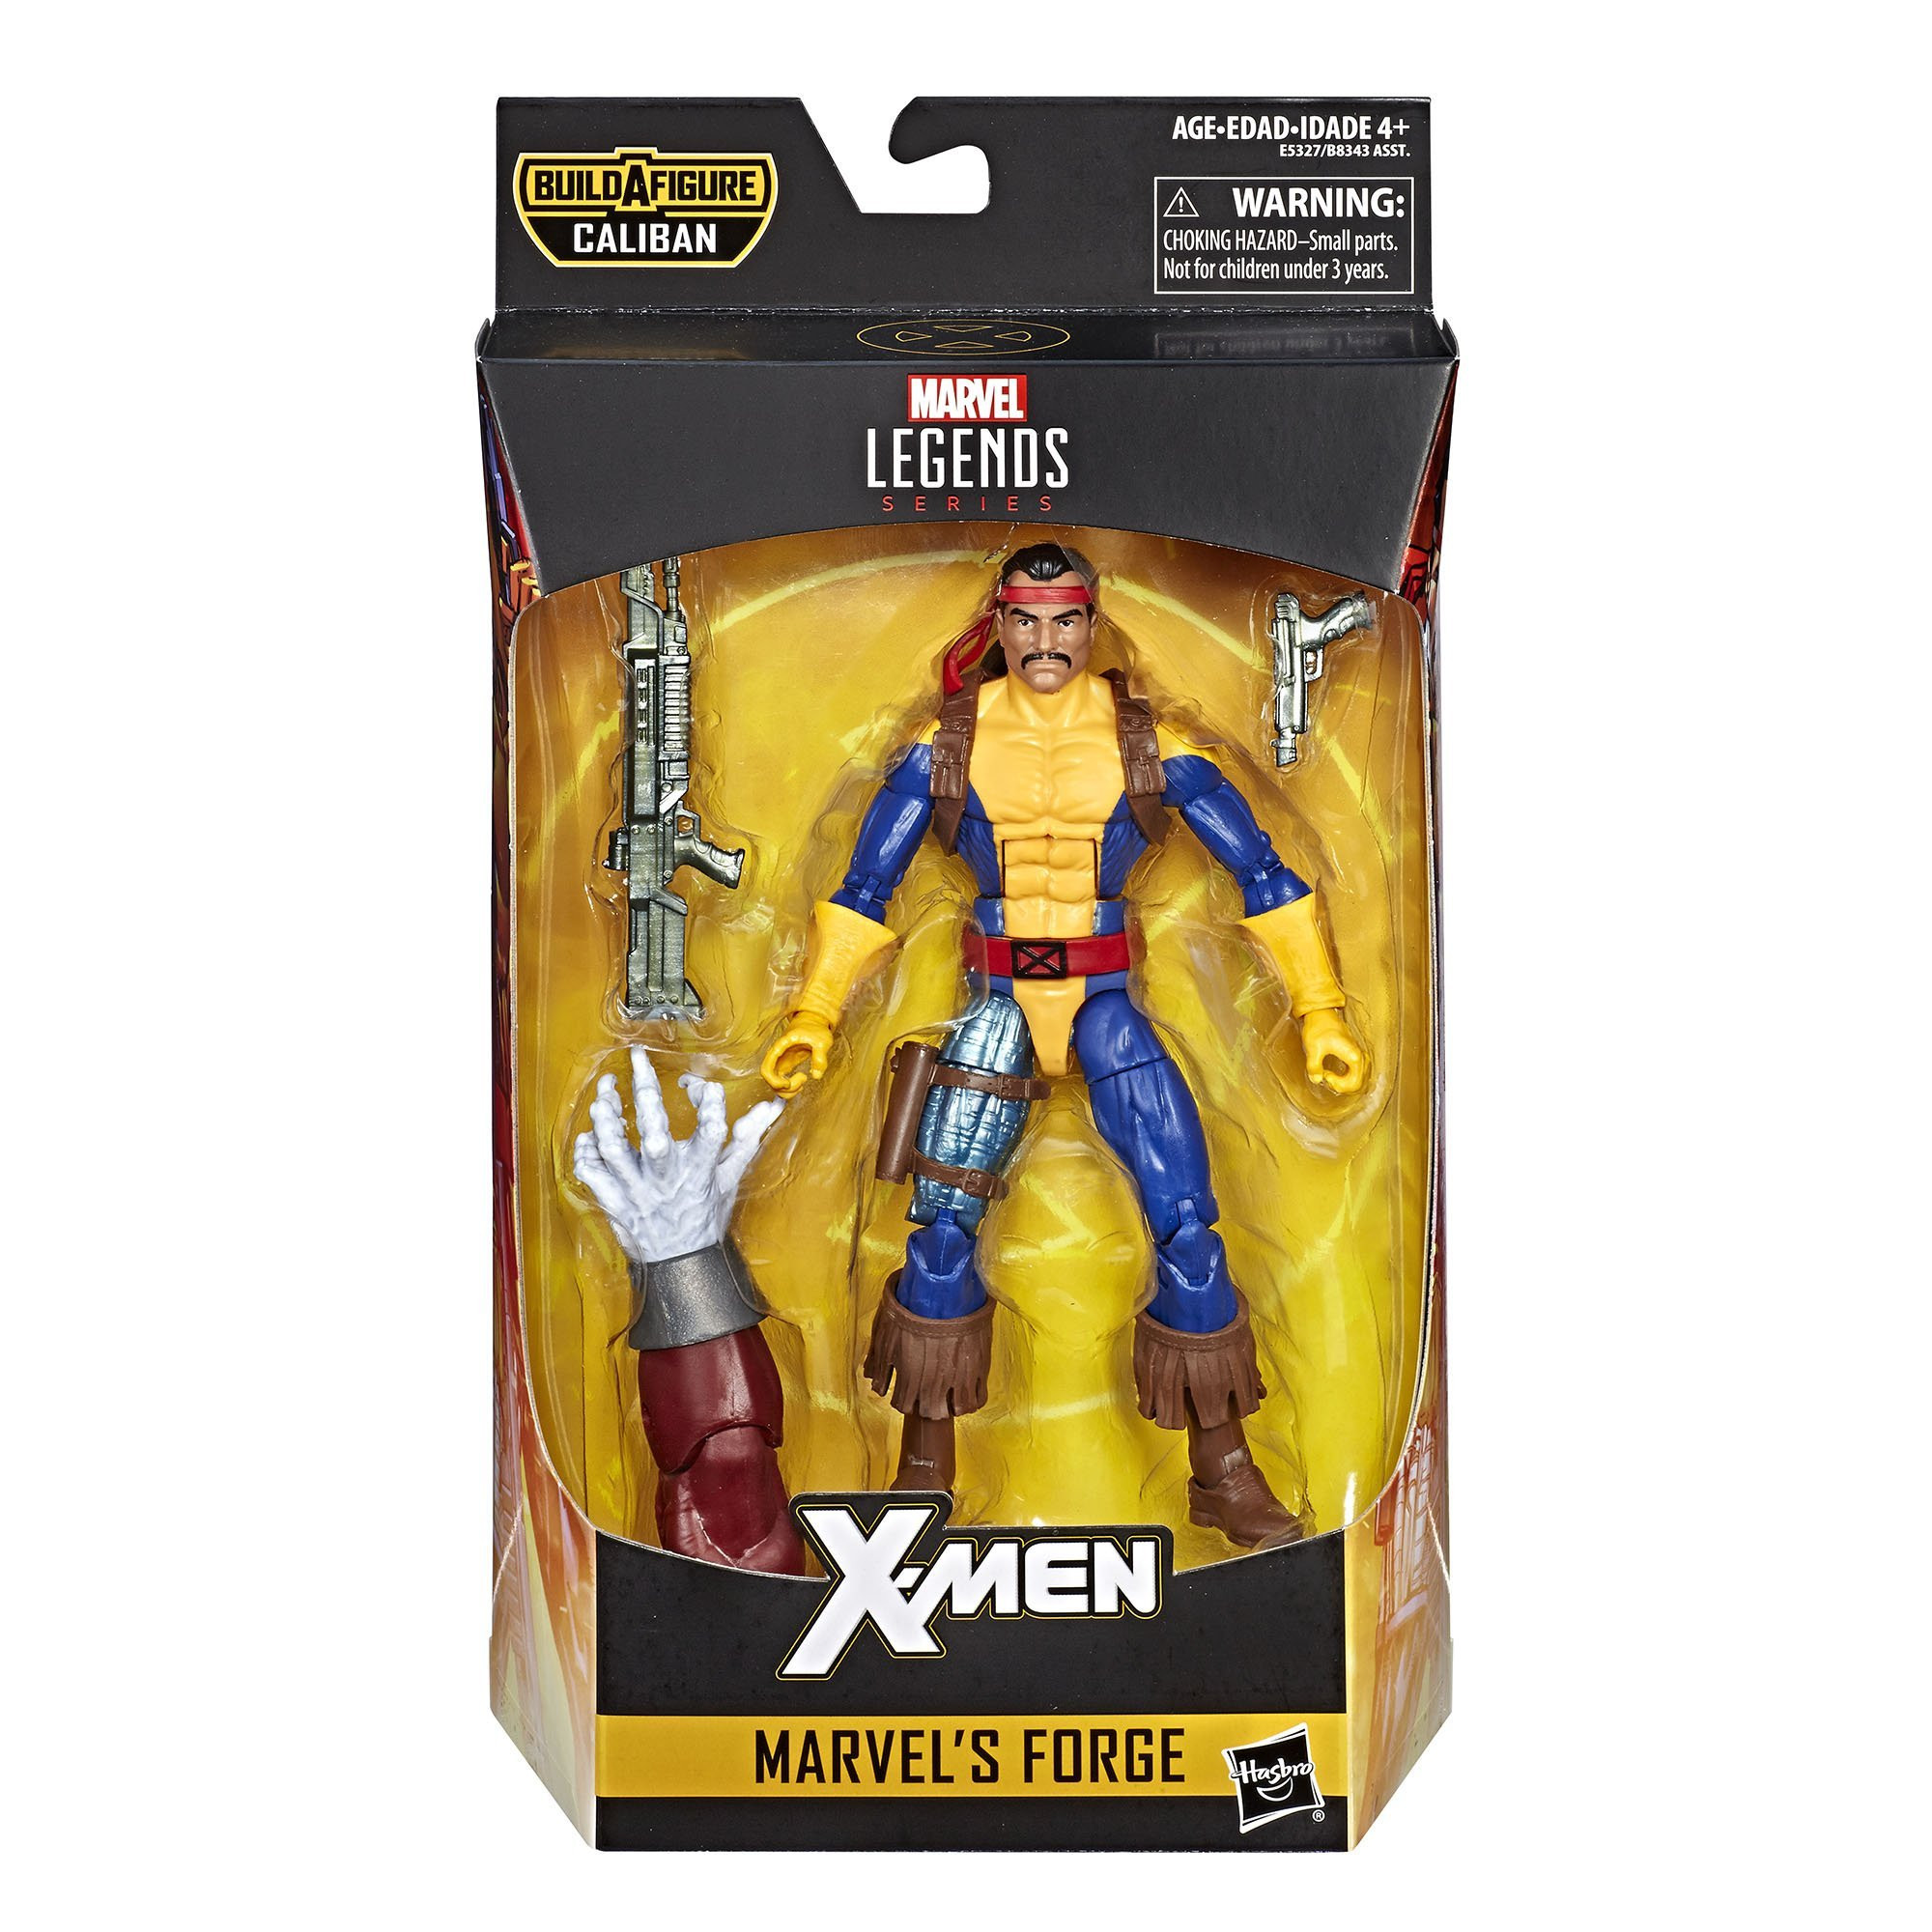 E5327AS000_Marvel_Legends_Series_Marvel_s_Forge_package_2000x-2000x2000